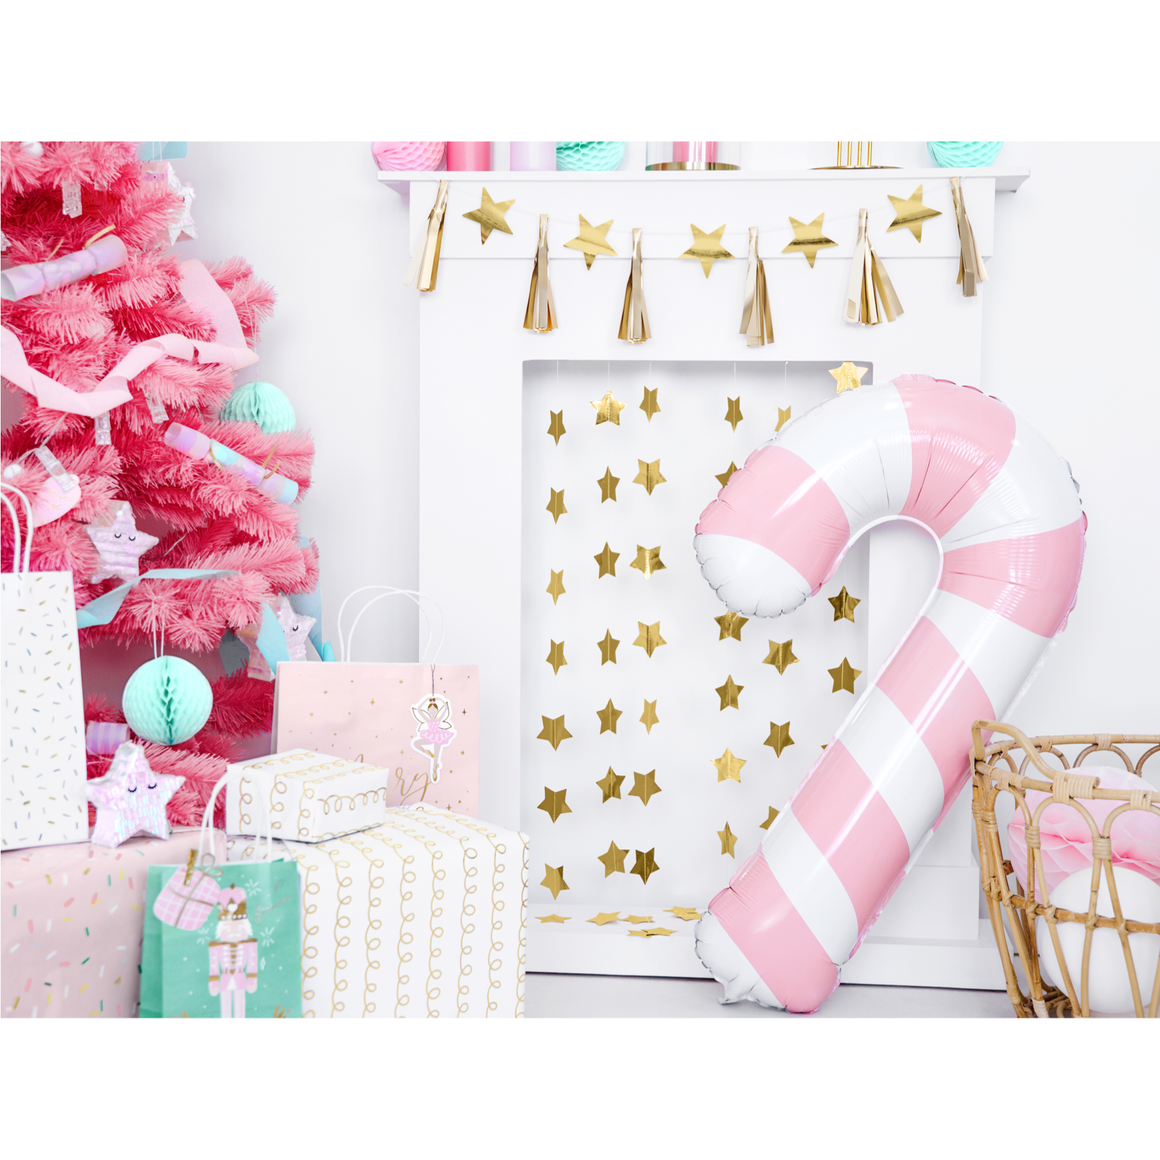 BALLOONS - CHRISTMAS CANDY CANE PINK